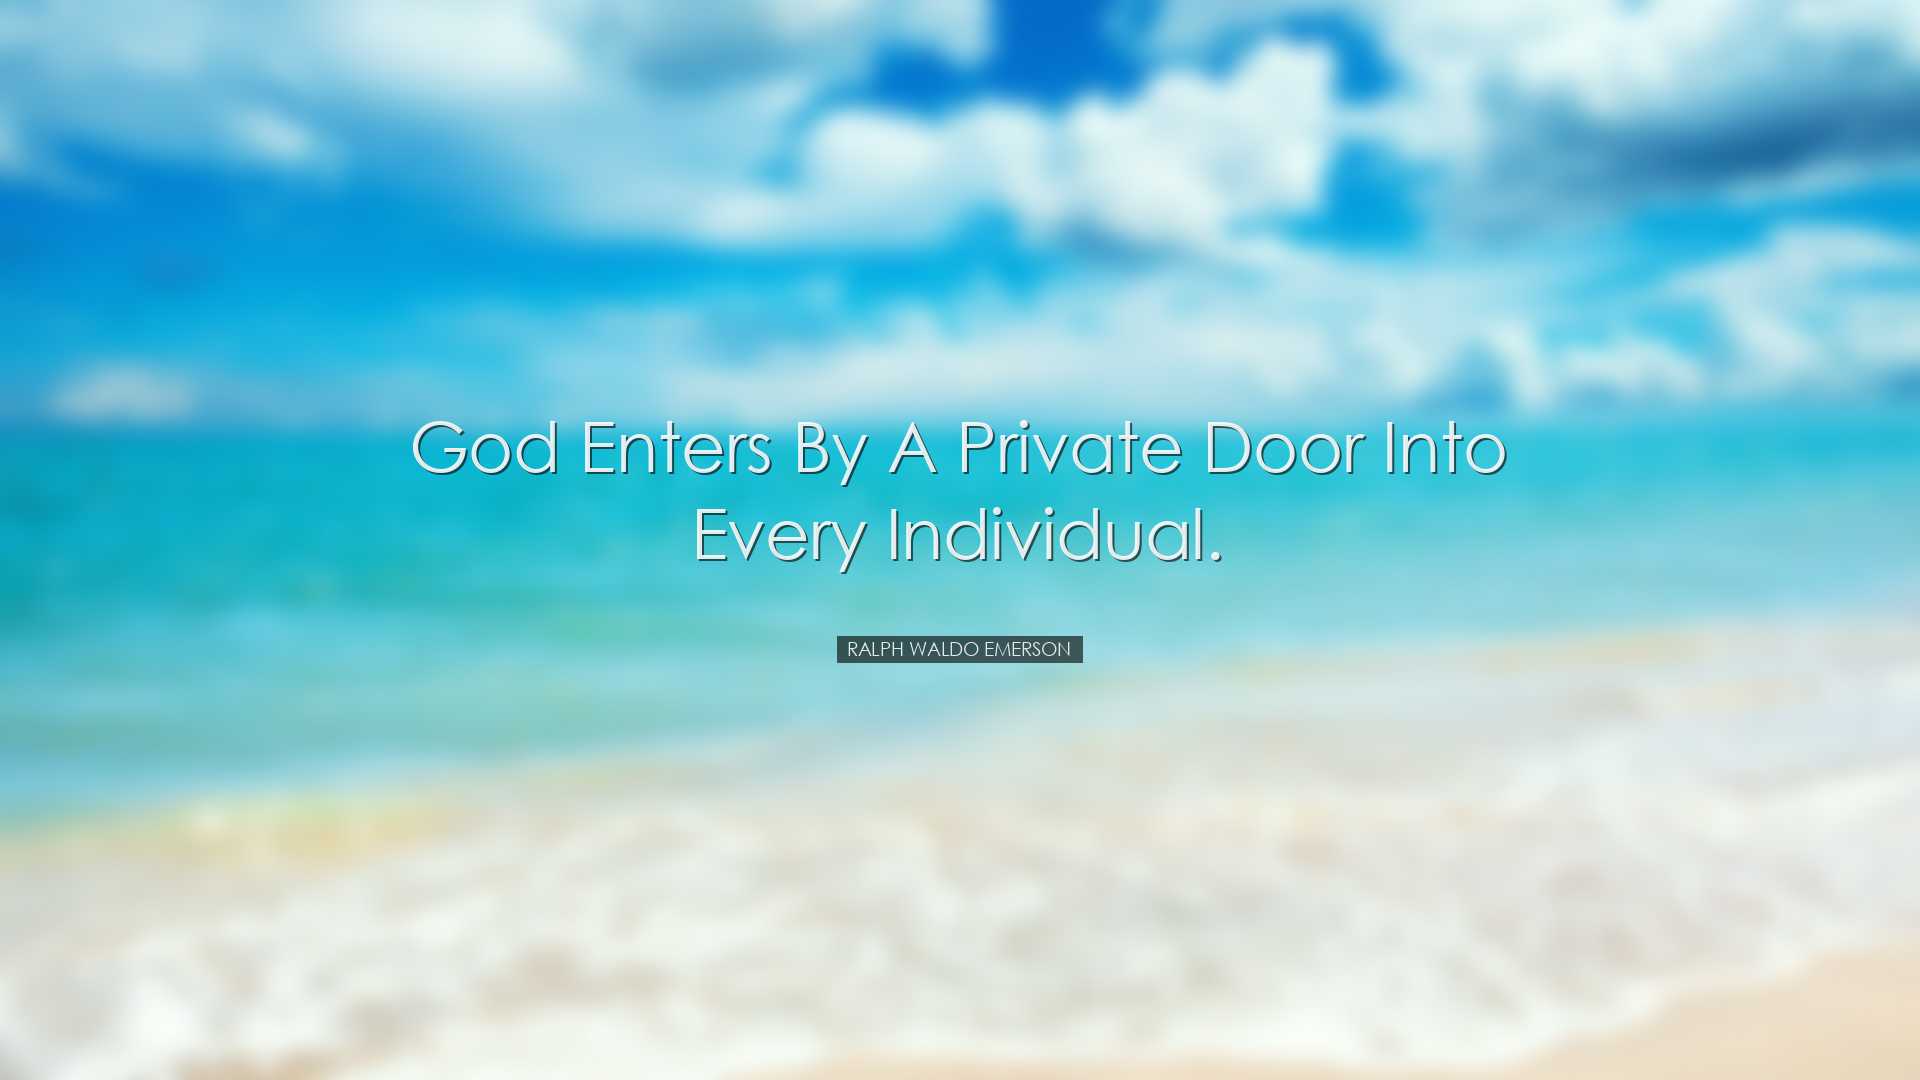 God enters by a private door into every individual. - Ralph Waldo